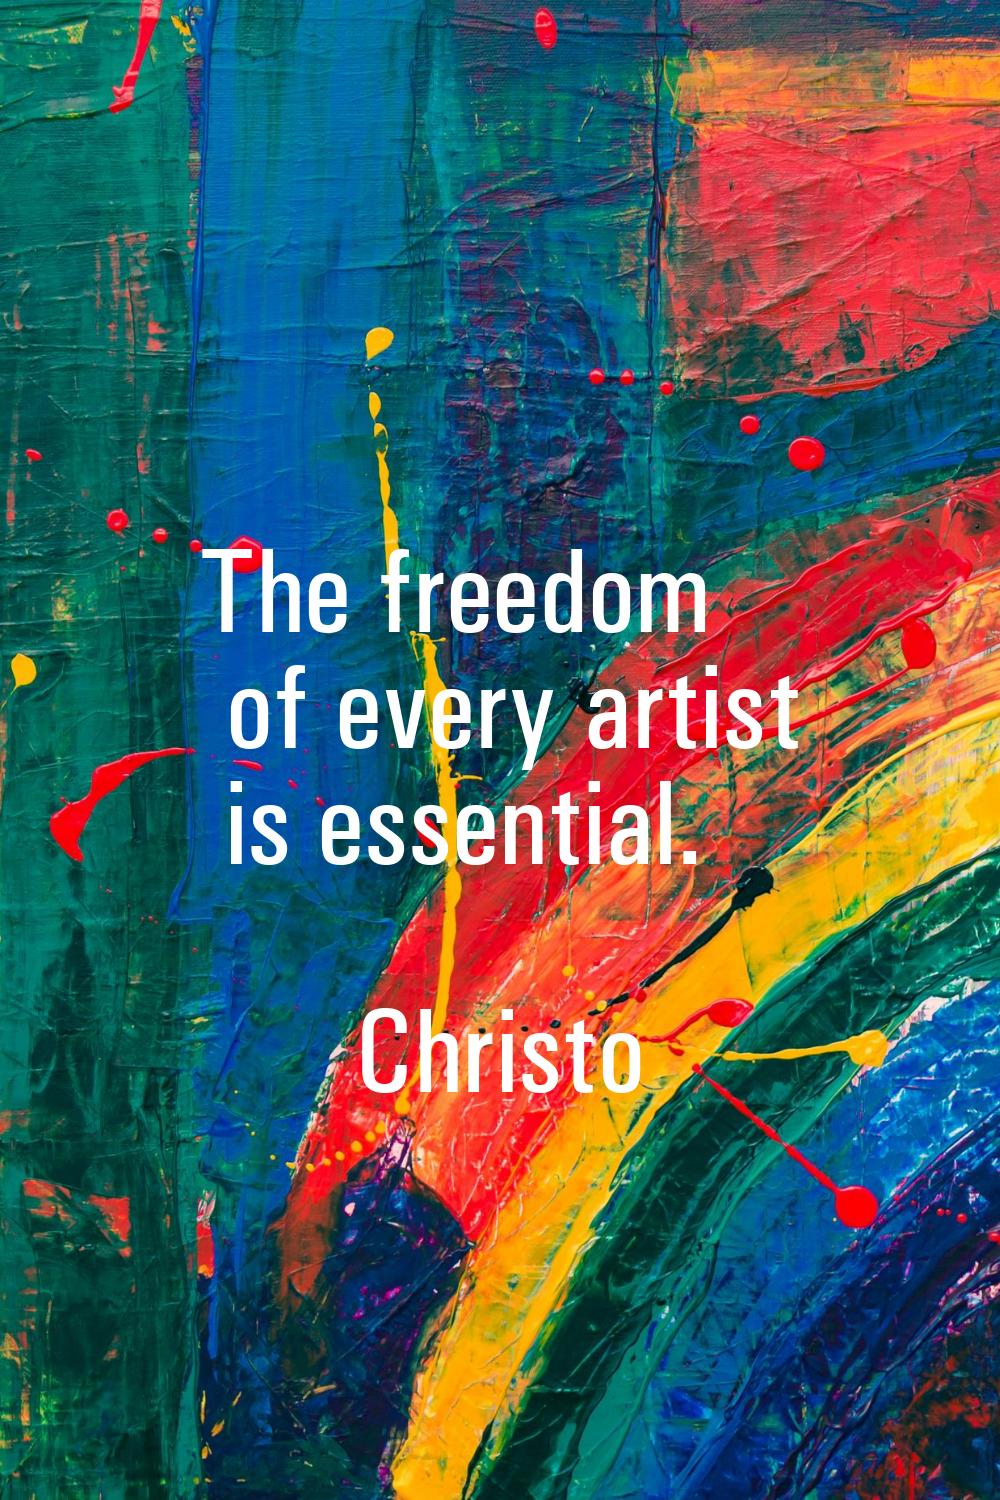 The freedom of every artist is essential.